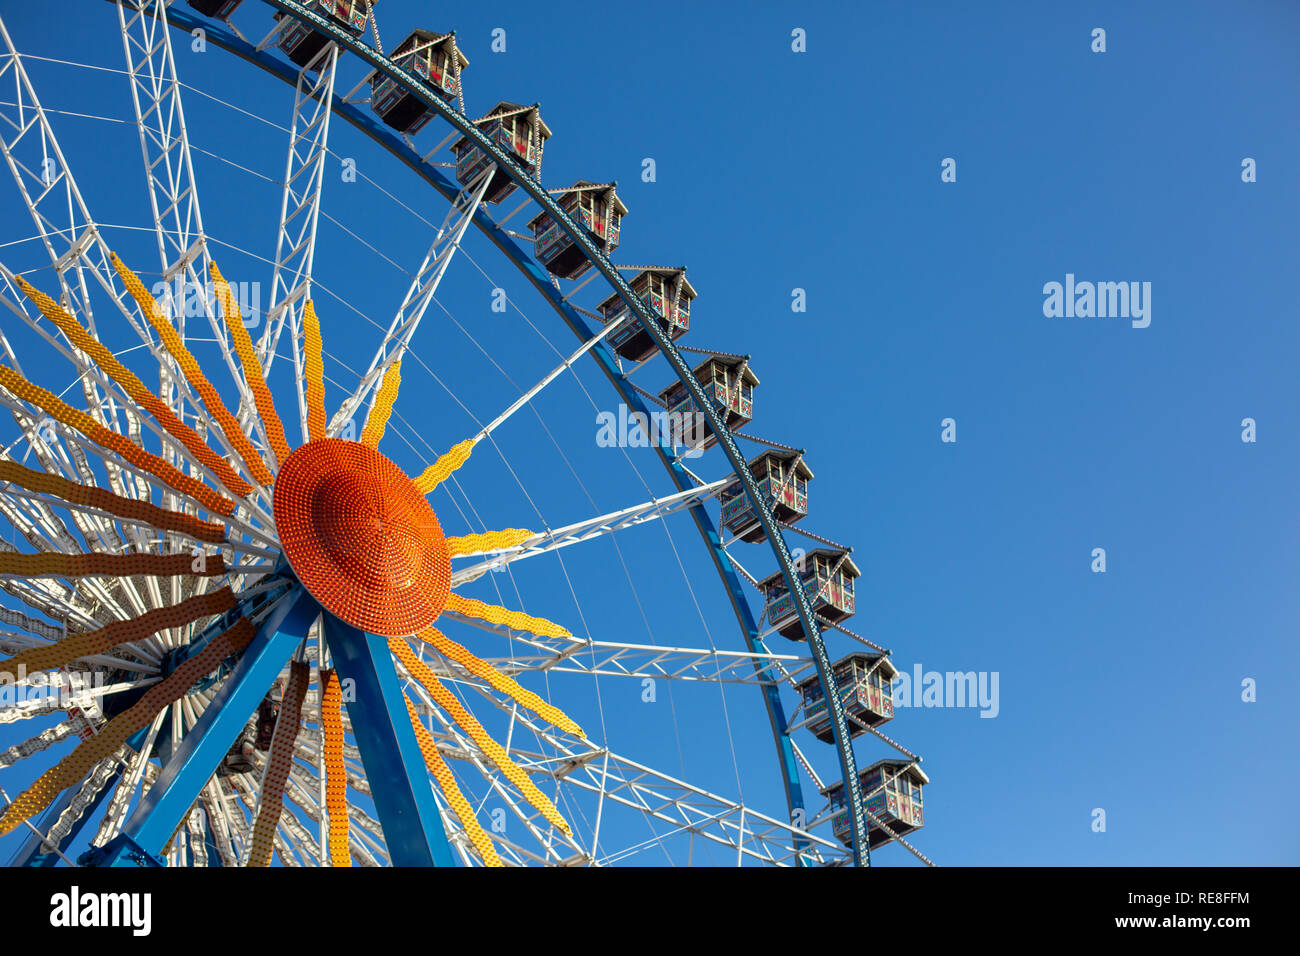 Berlin, Germany - December 5th, 2018: Ferris Wheel against the blue sky next to Rotes Rathaus. Stock Photo